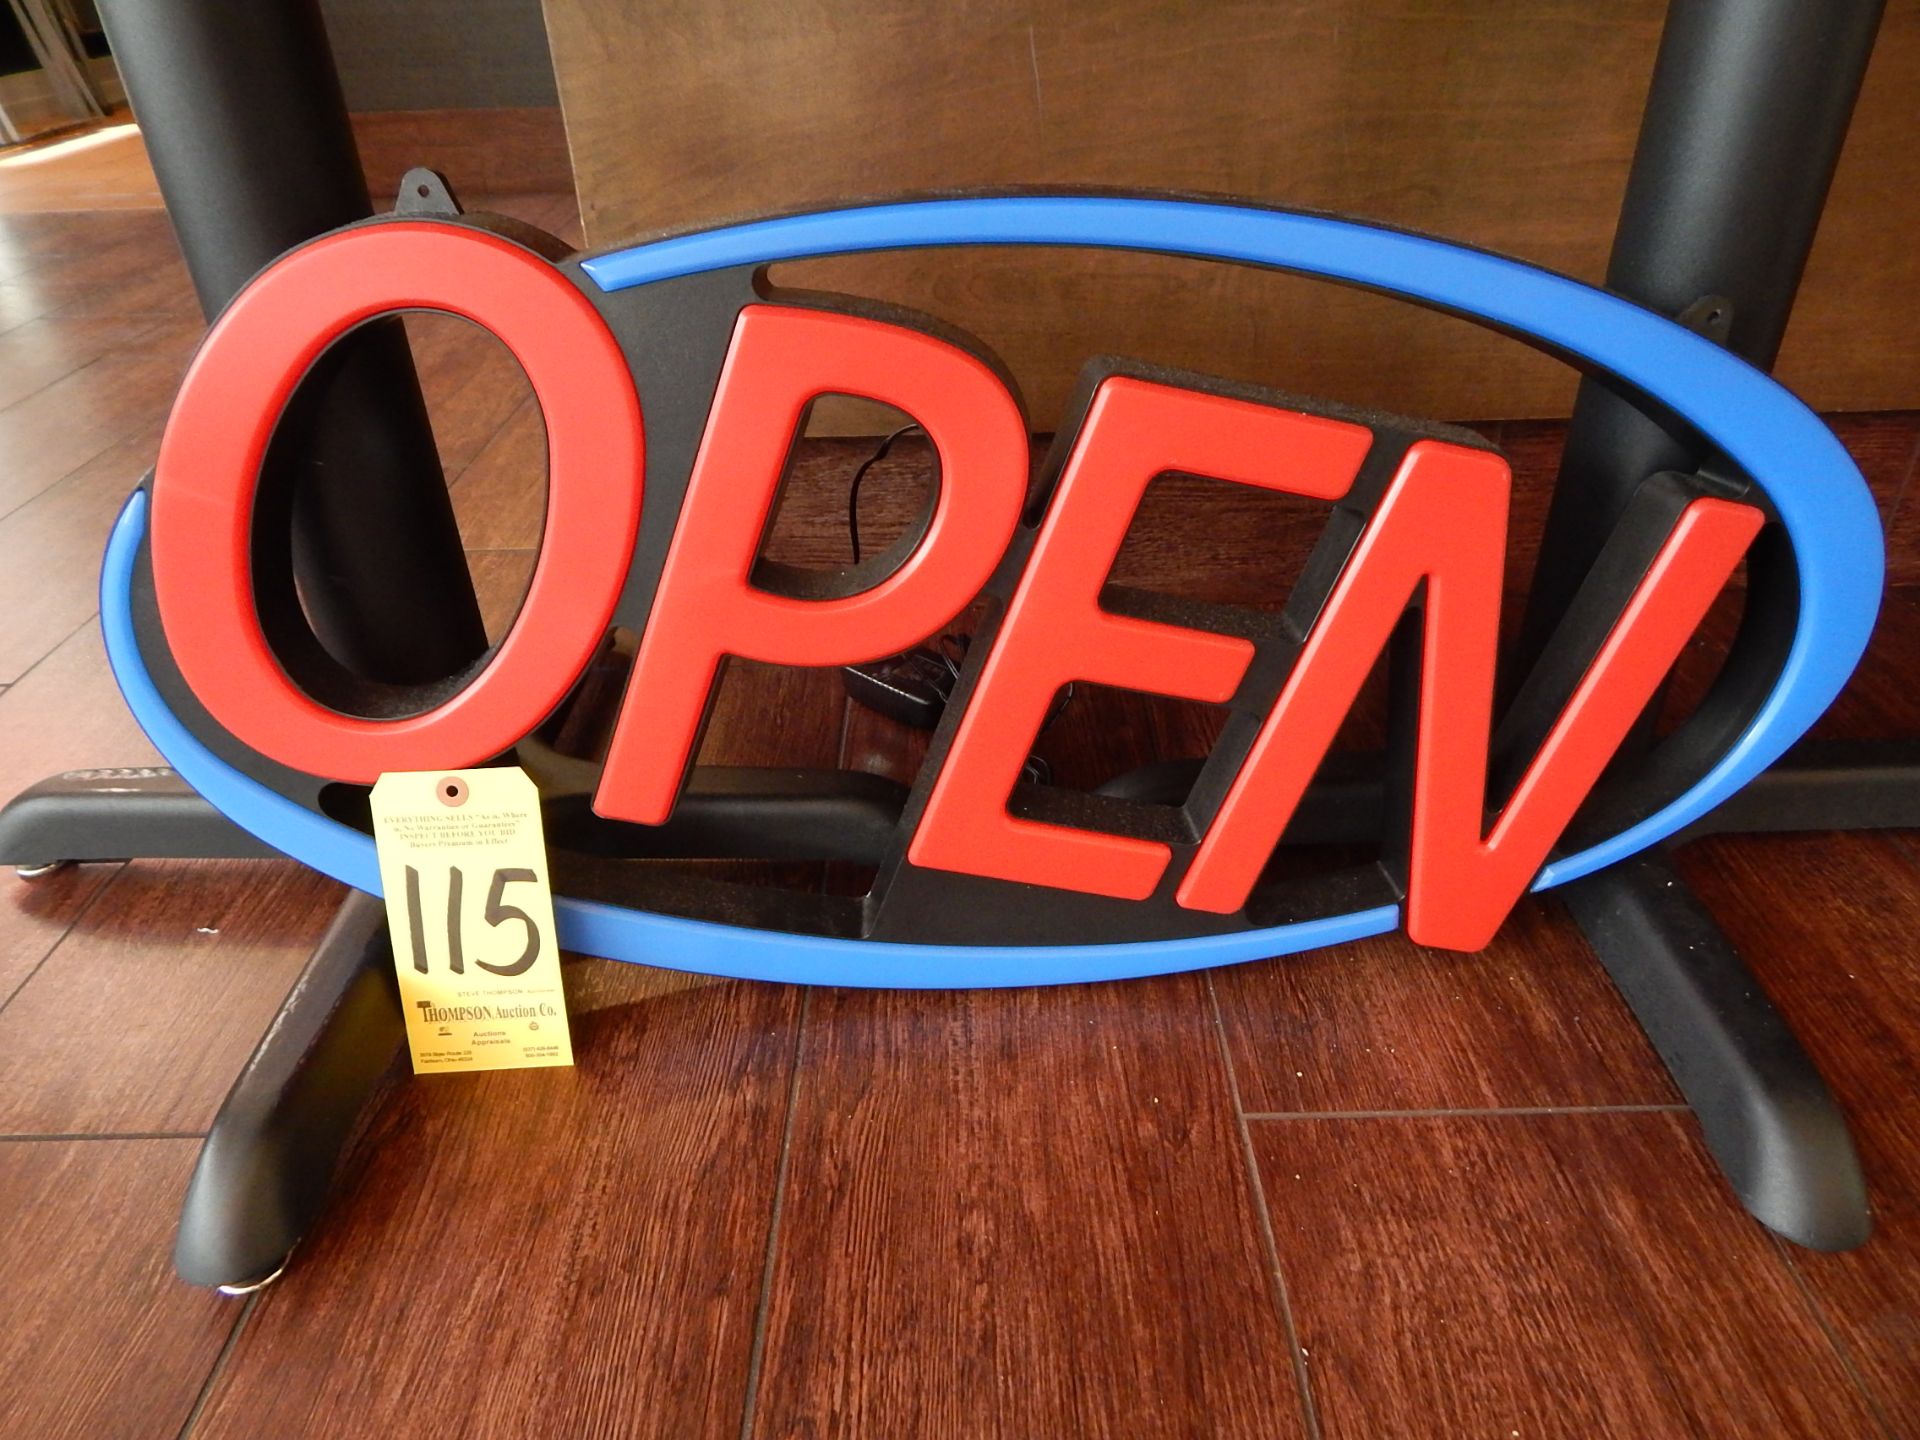 "Open" Sign